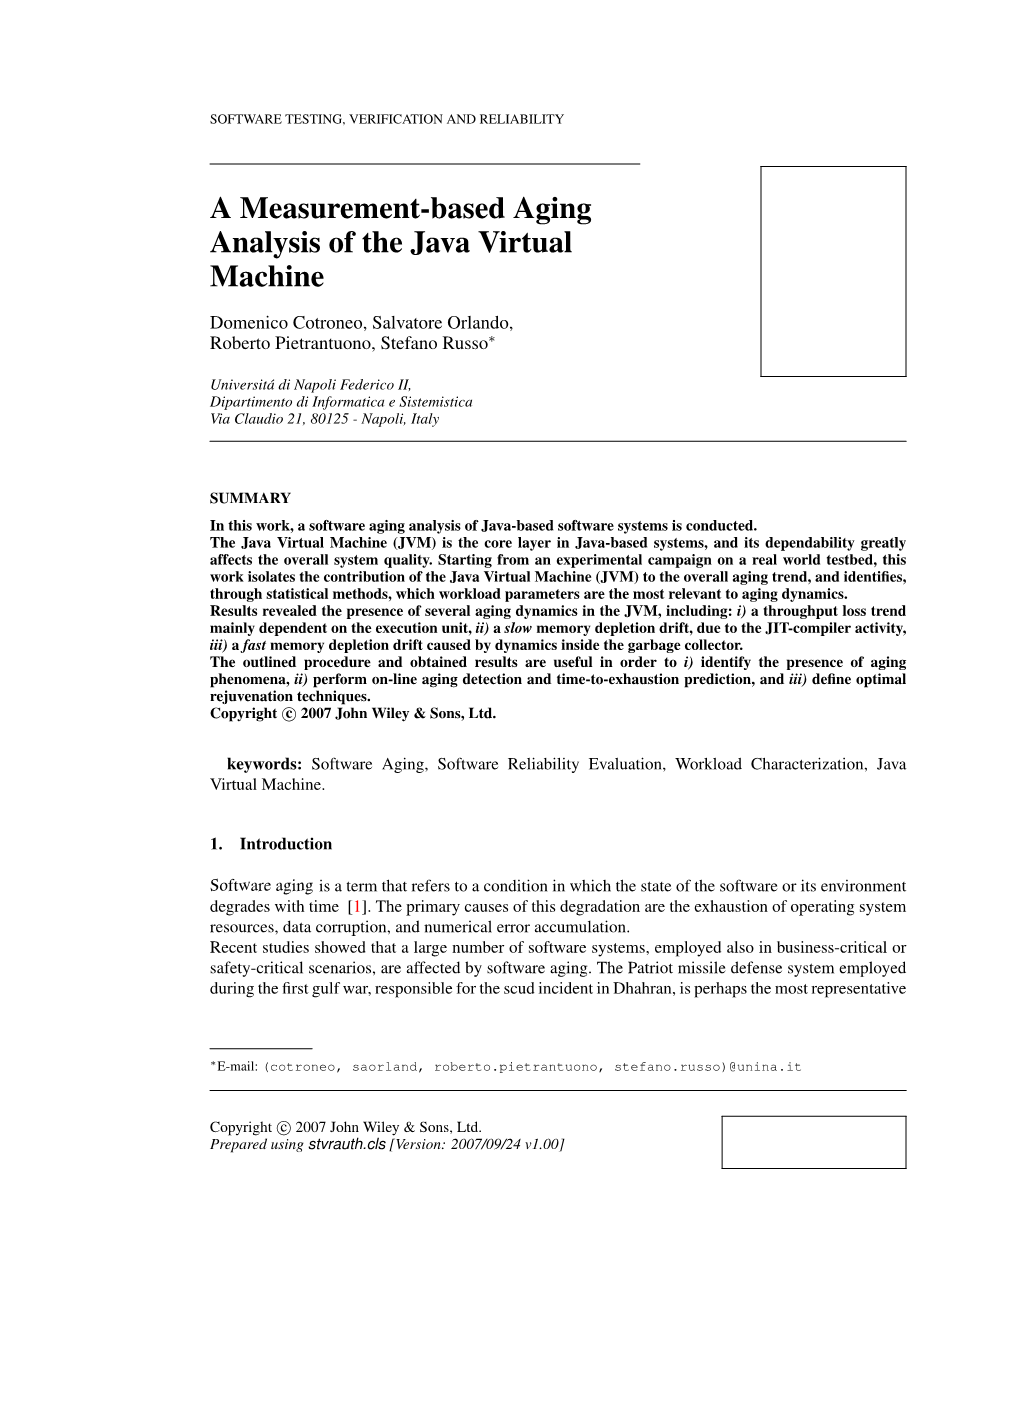 A Measurement-Based Aging Analysis of the Java Virtual Machine